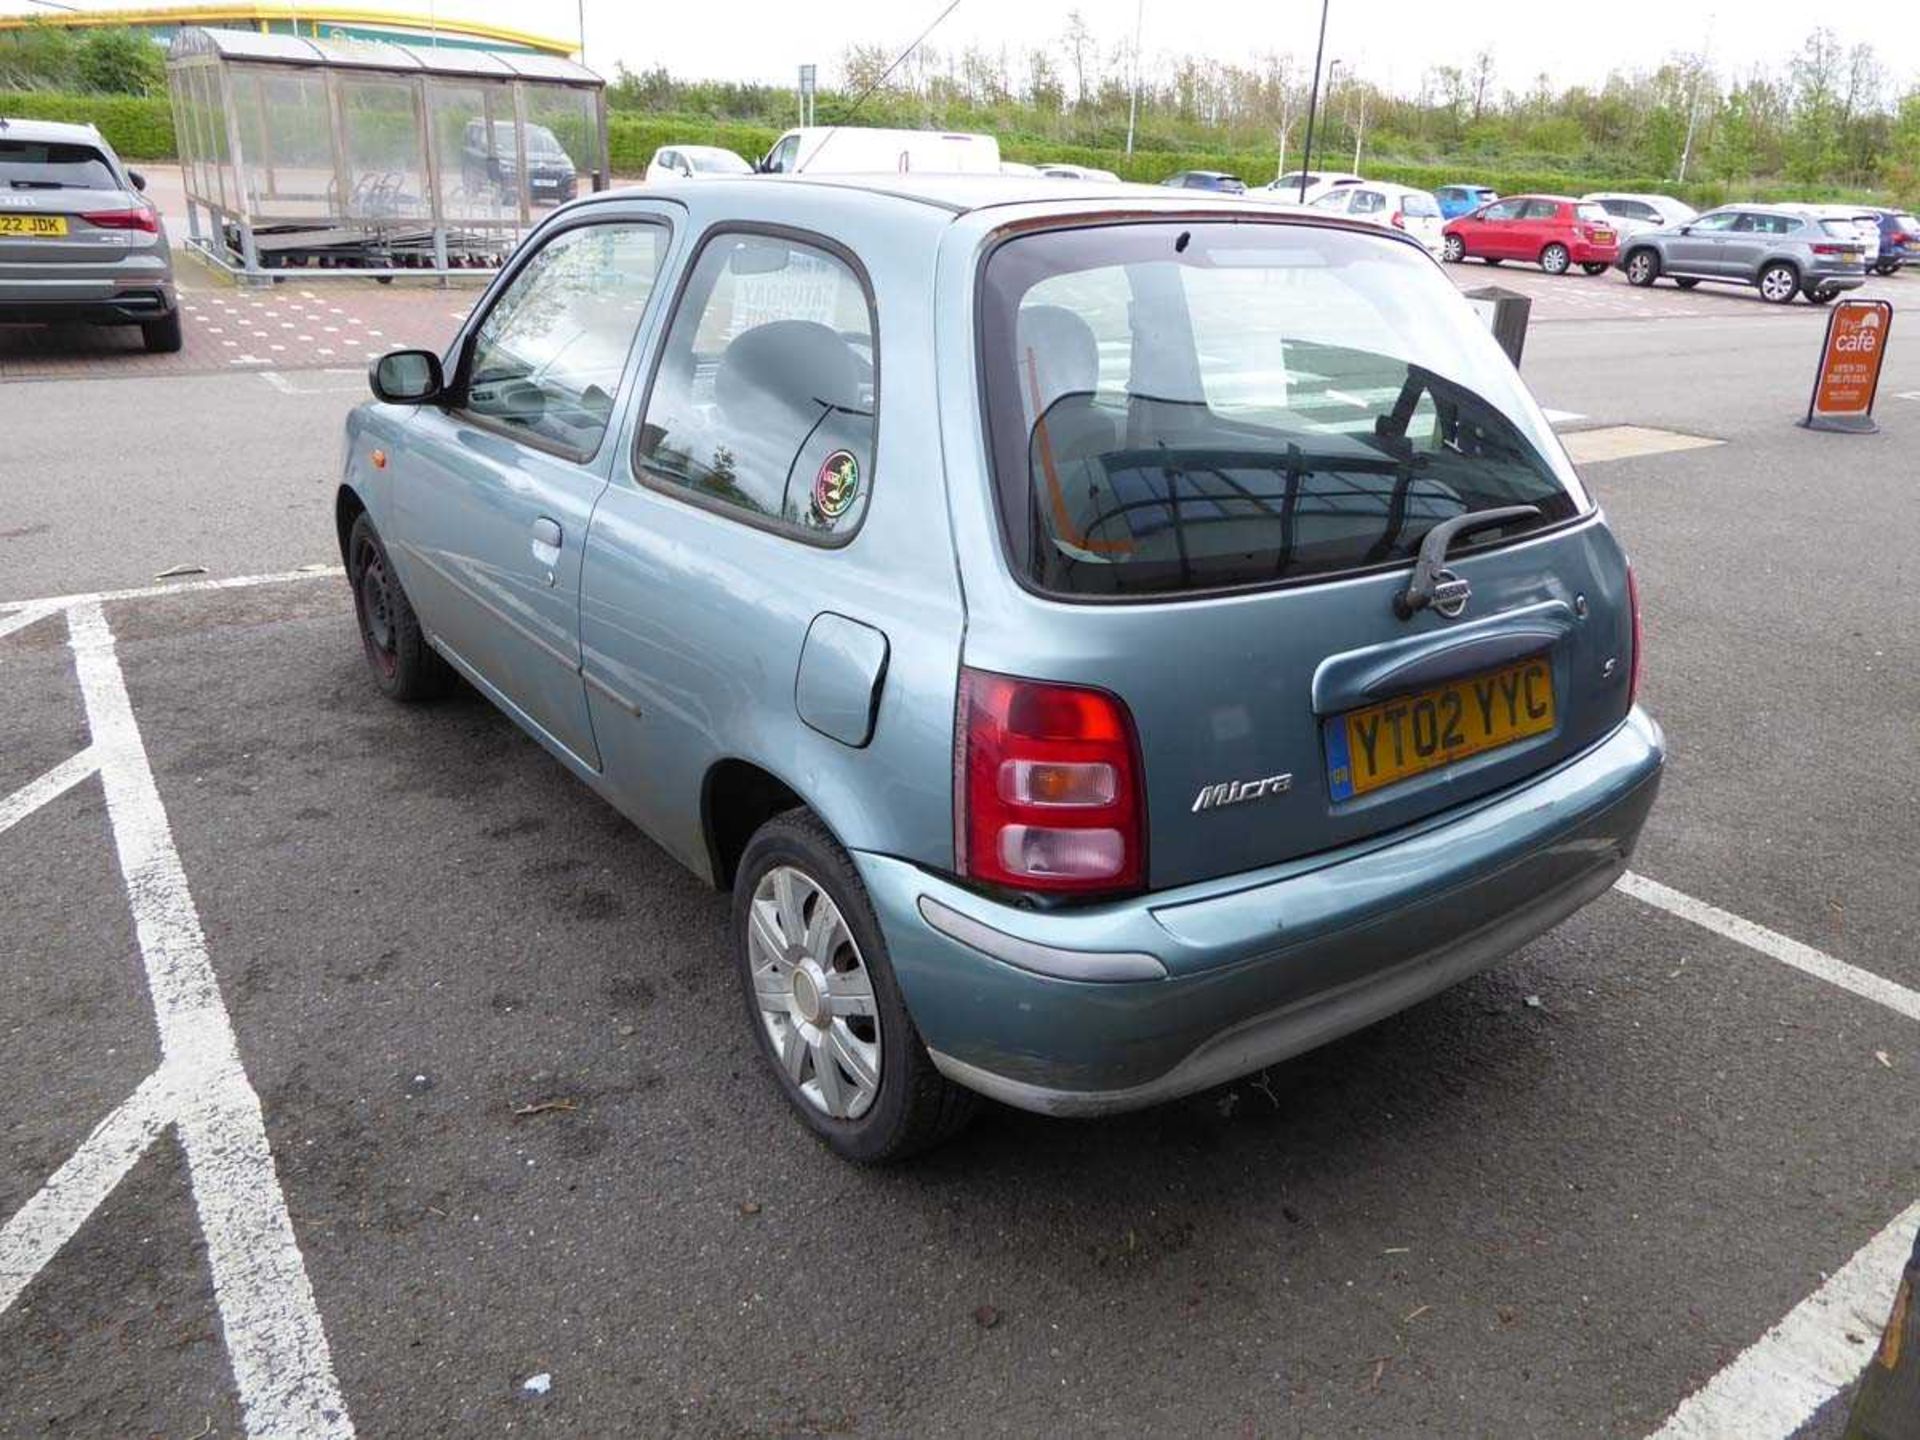 (YT02 YYC) Nissan Micra S Auto, 3-door hatchback in grey, first registered 27/03/2002, 998cc - Image 7 of 10